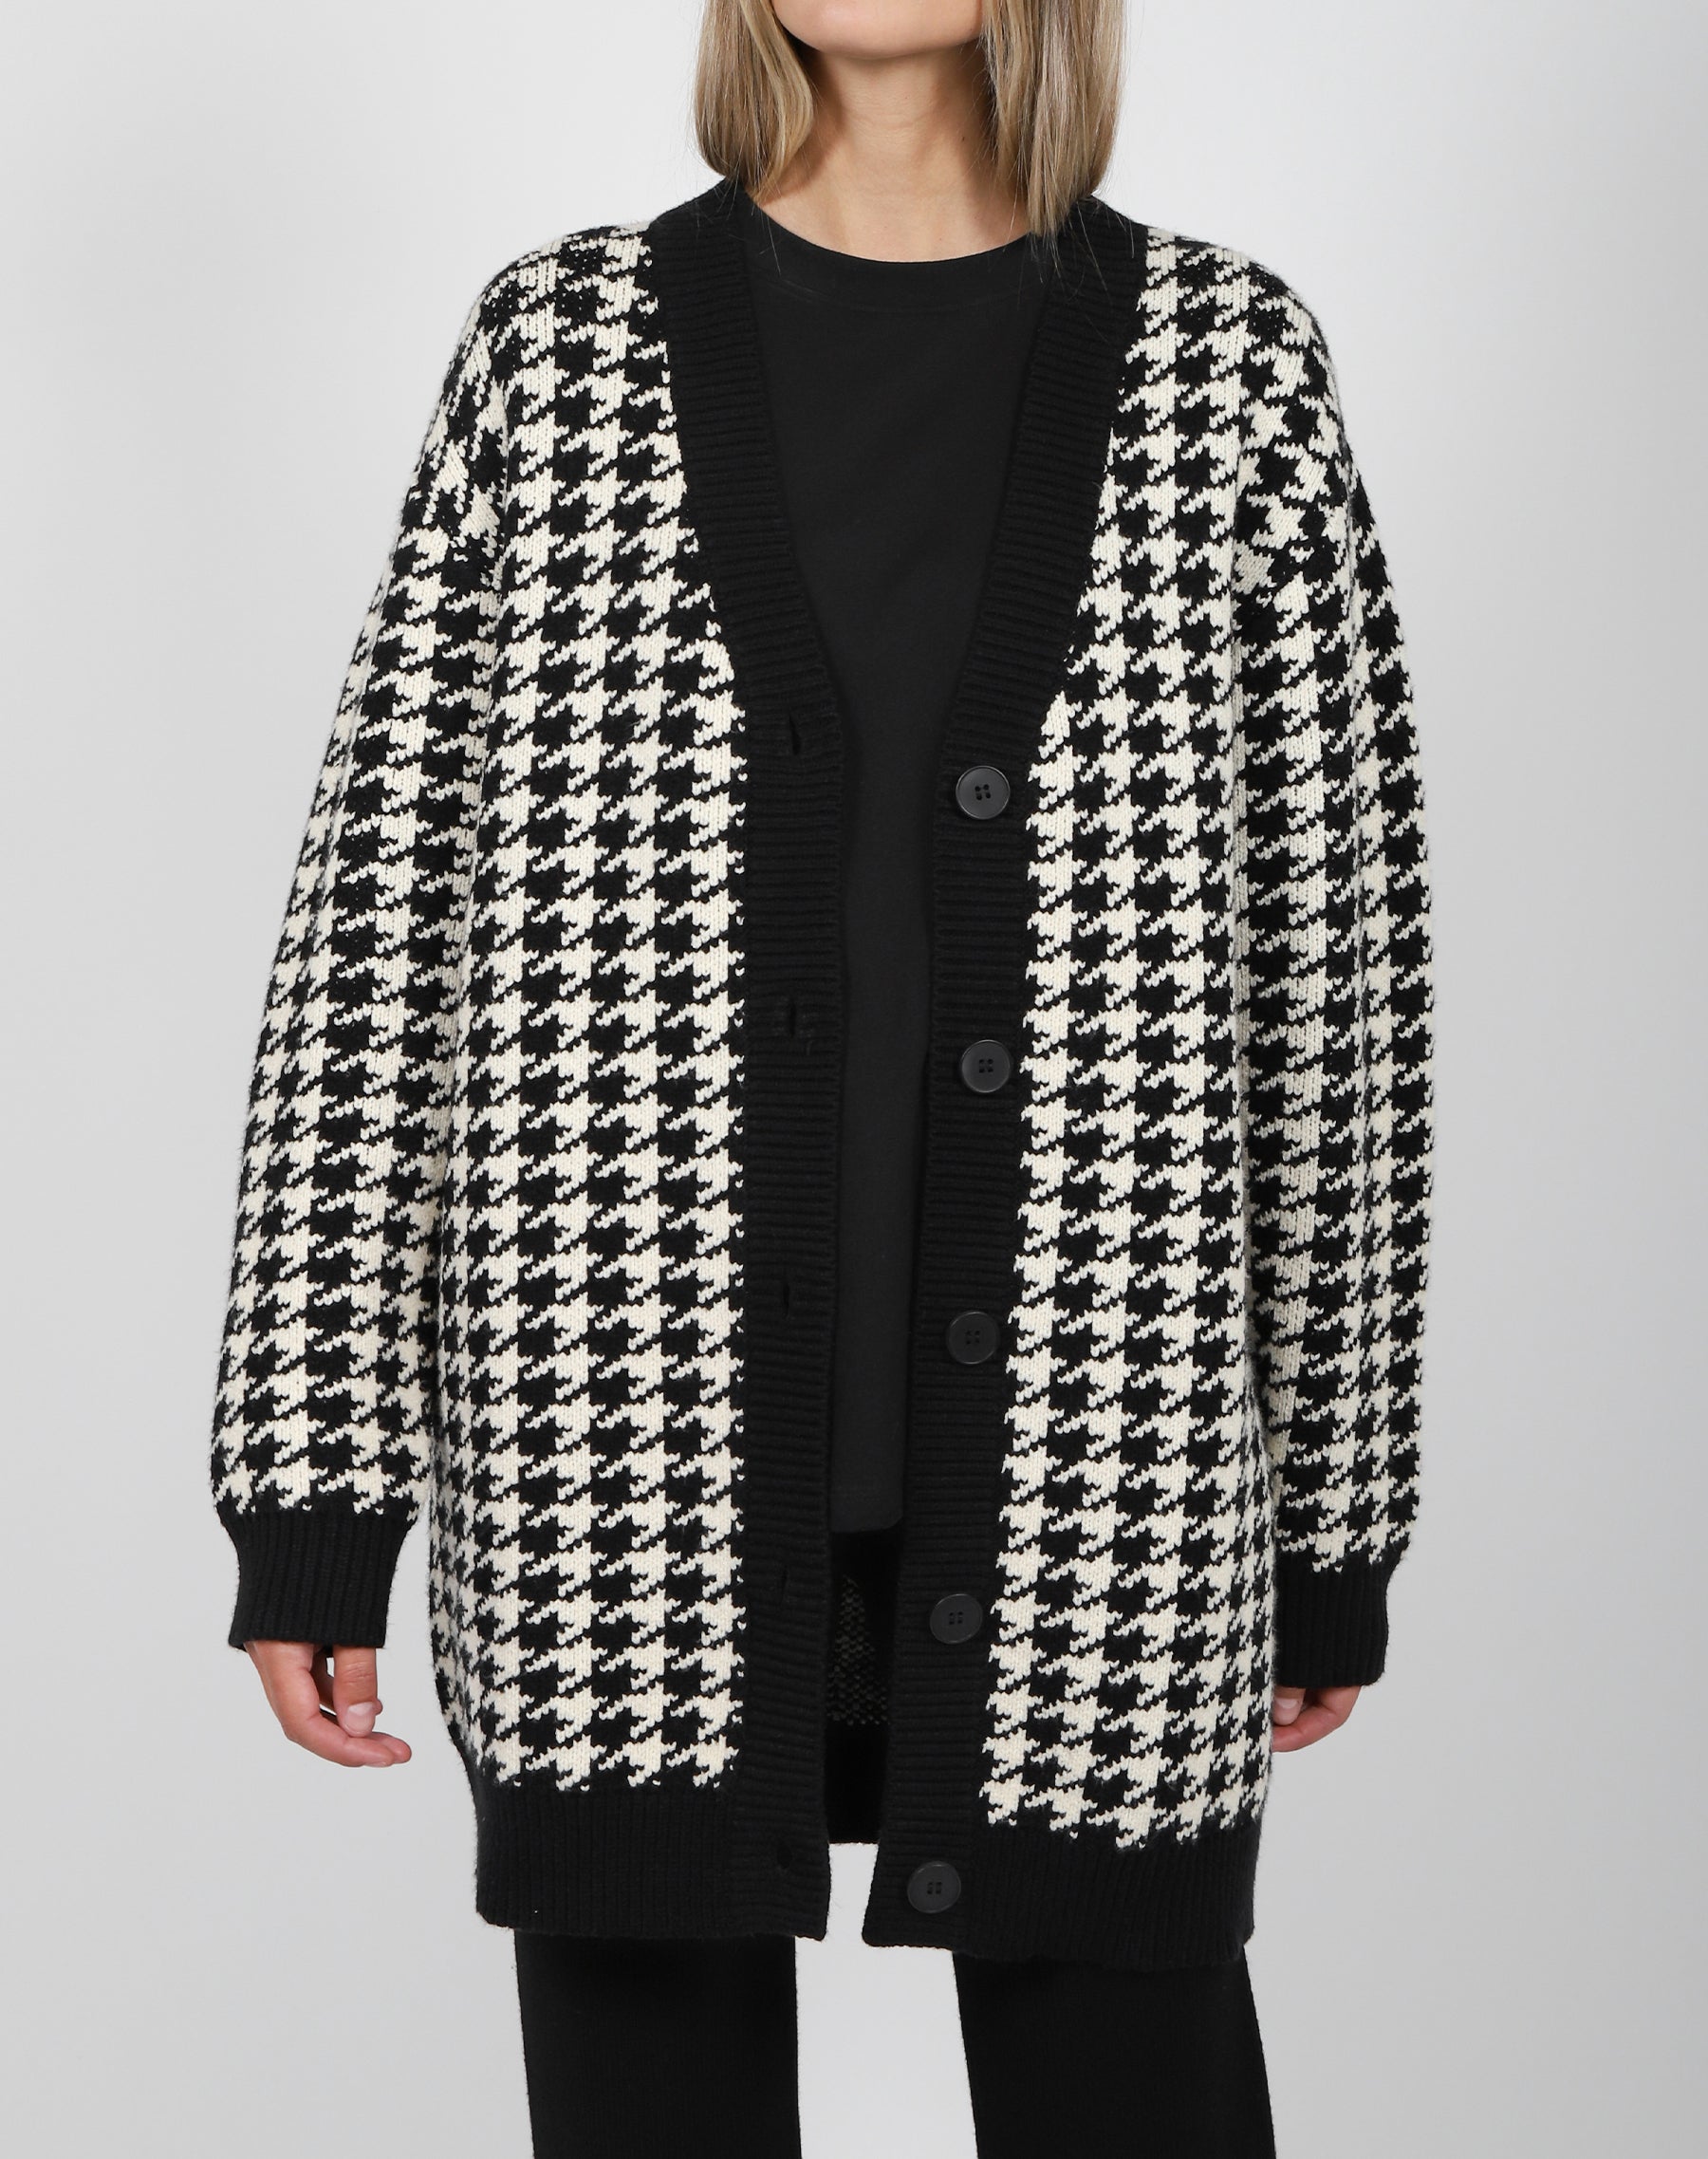 The Houndstooth Oversized Knit Cardigan | Houndstooth